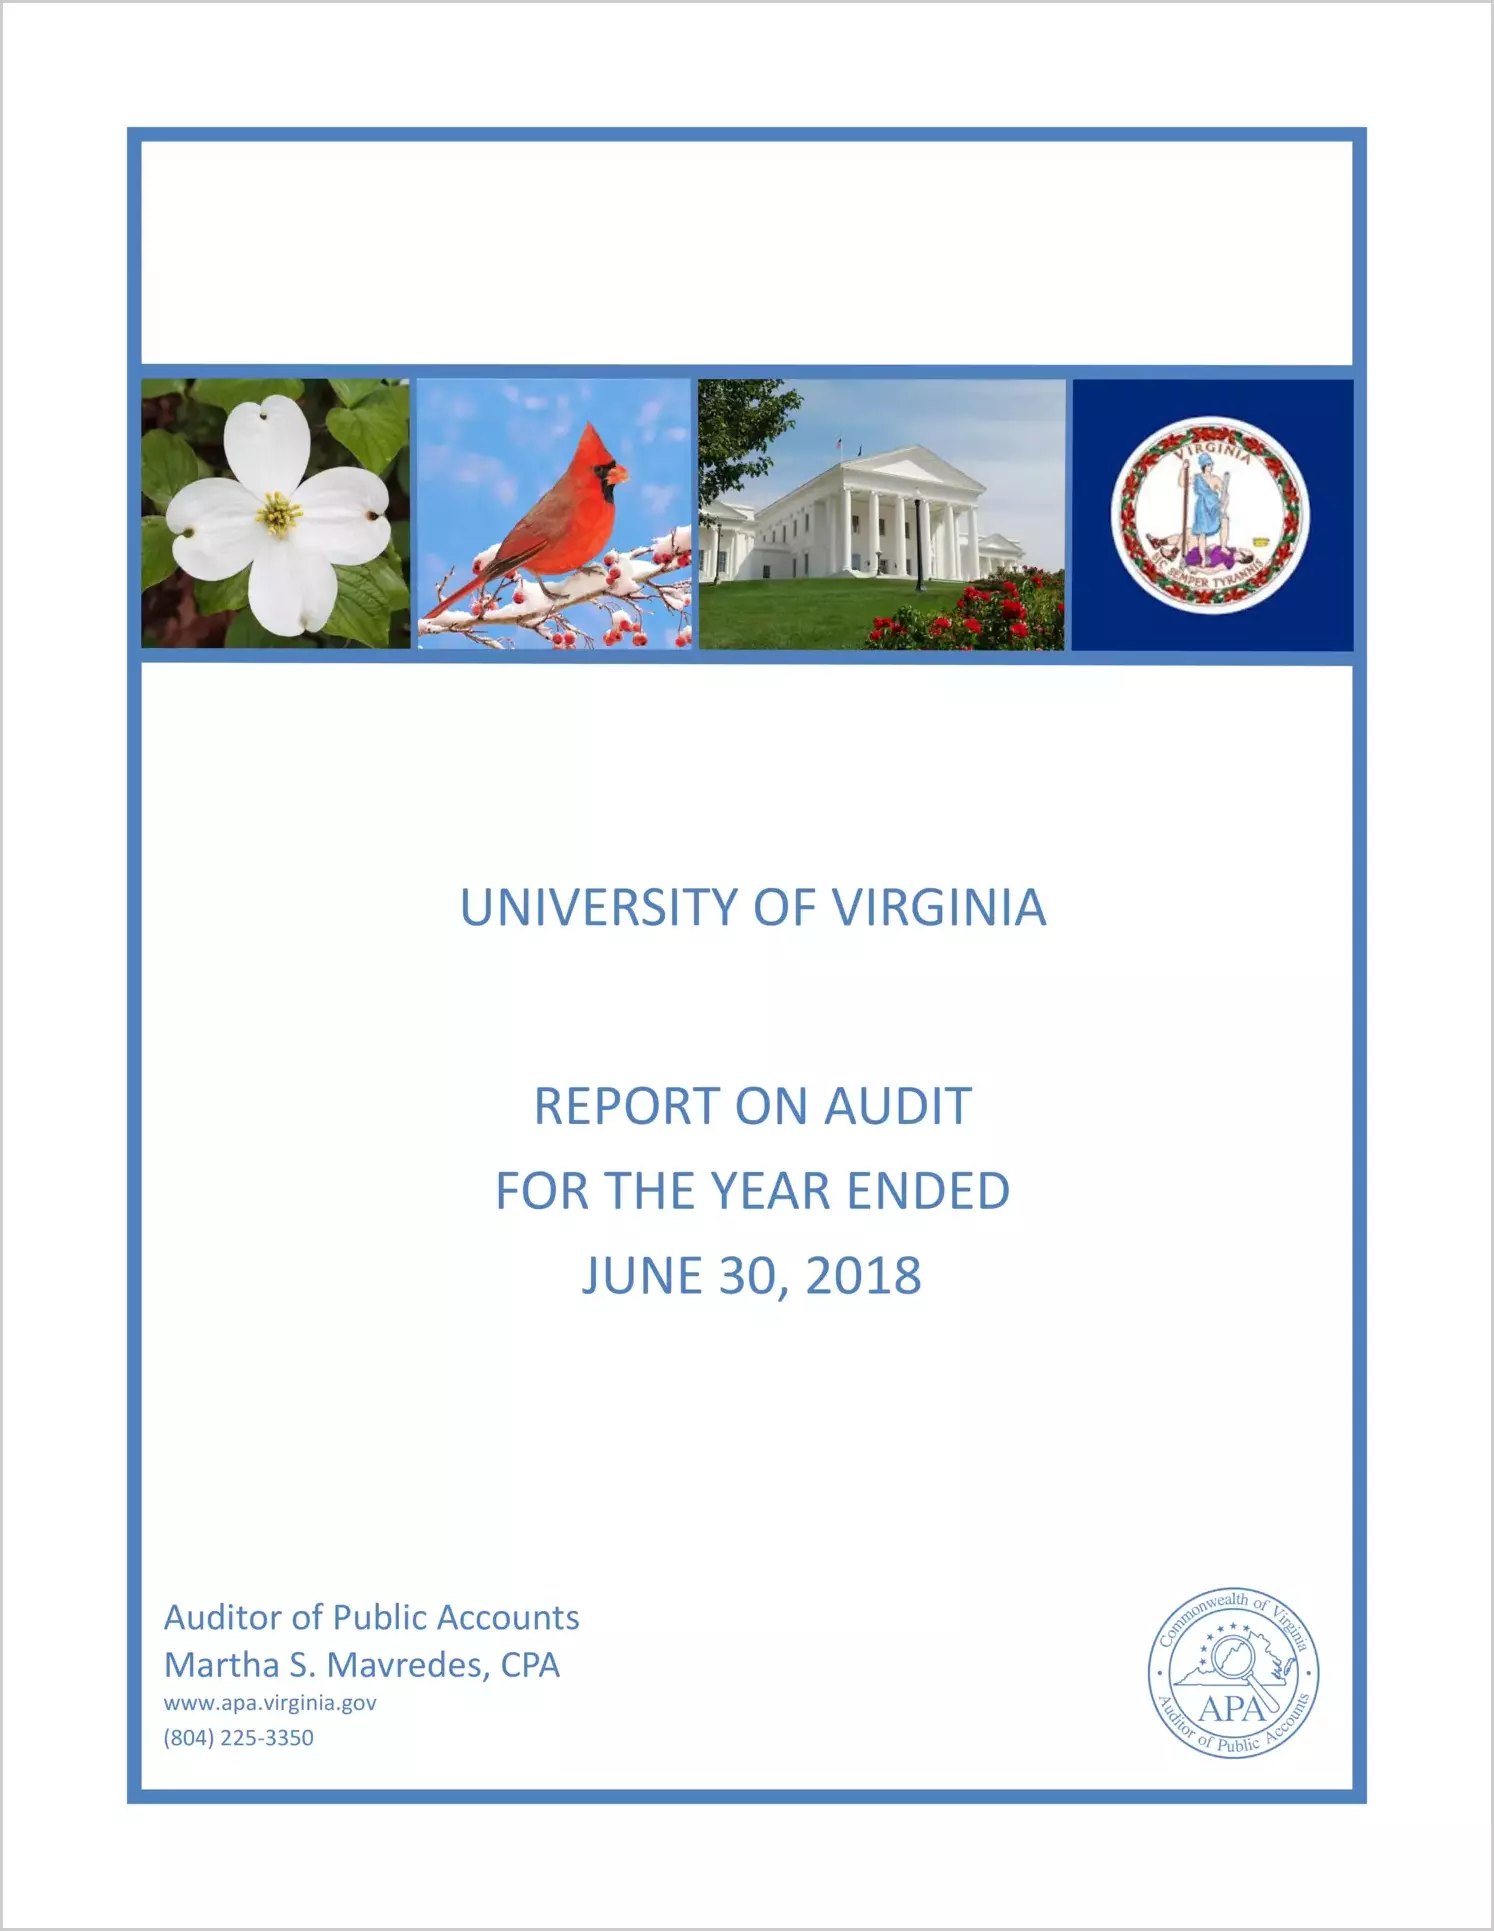 University of Virginia for the year ended June 30, 2018